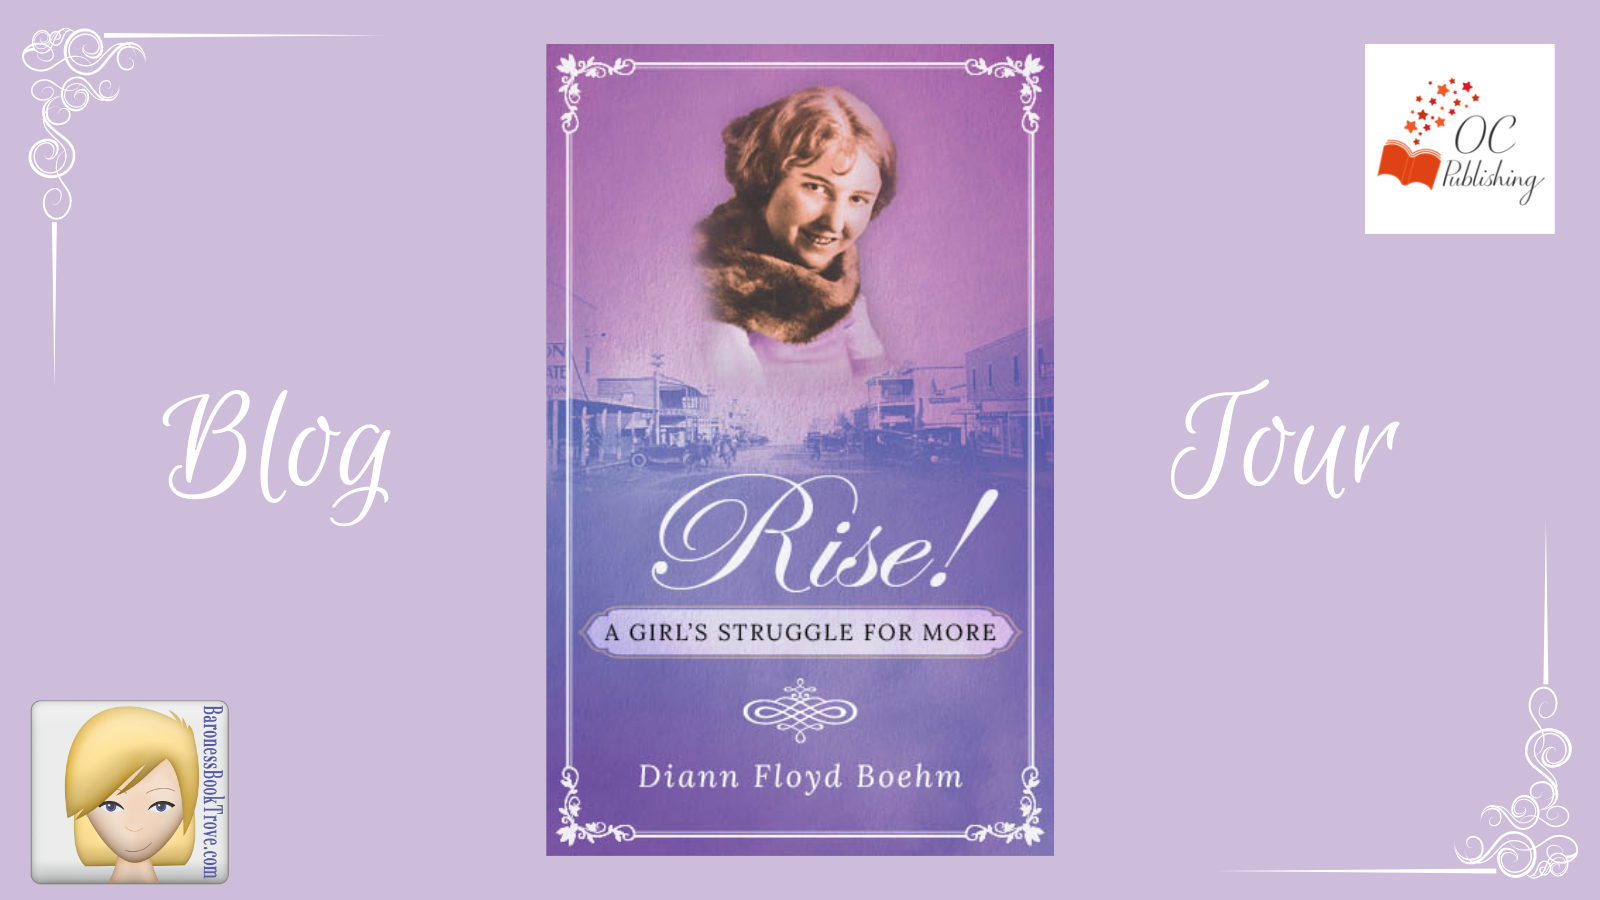 Rise! A Girl's Struggle for More by Diann Floyd Boehm